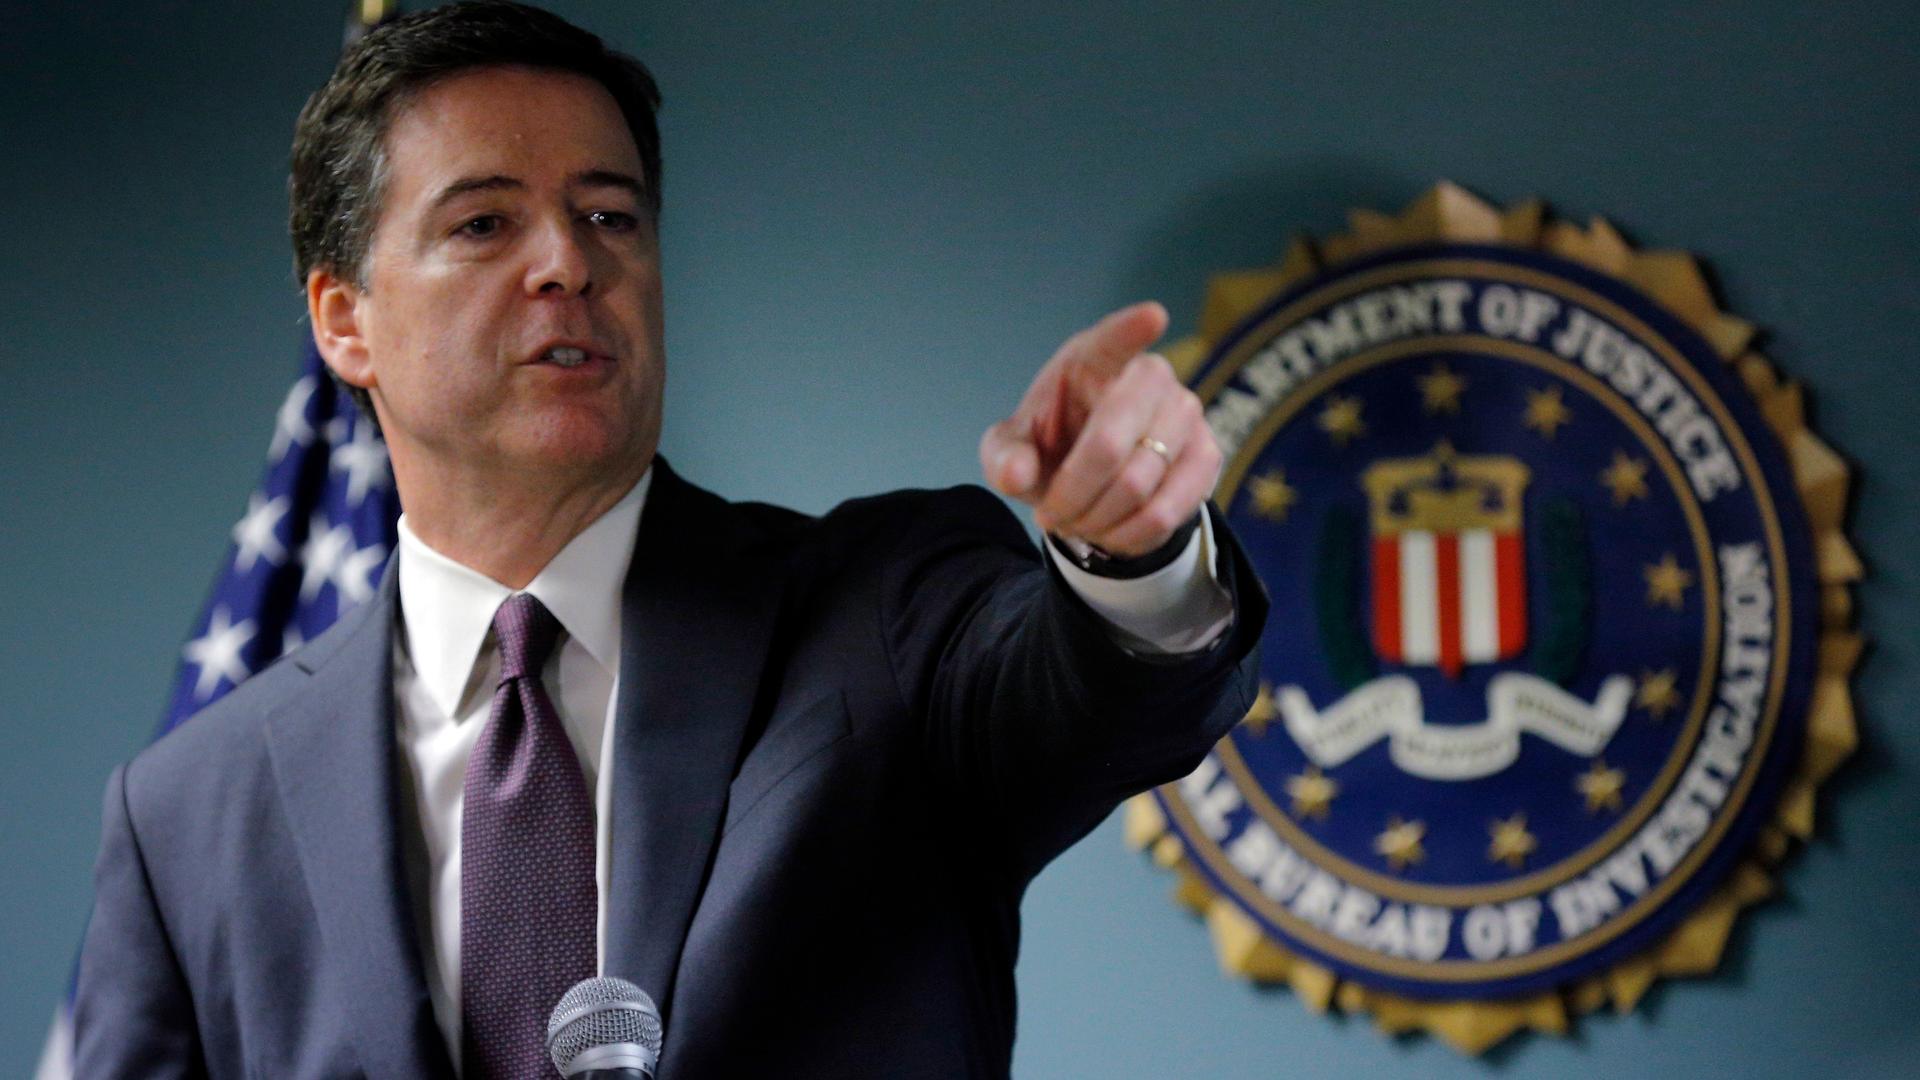 FBI Director James Comey takes a question from a reporter during a news conference at the FBI field office in Boston, Massachusetts, on November 18, 2014.